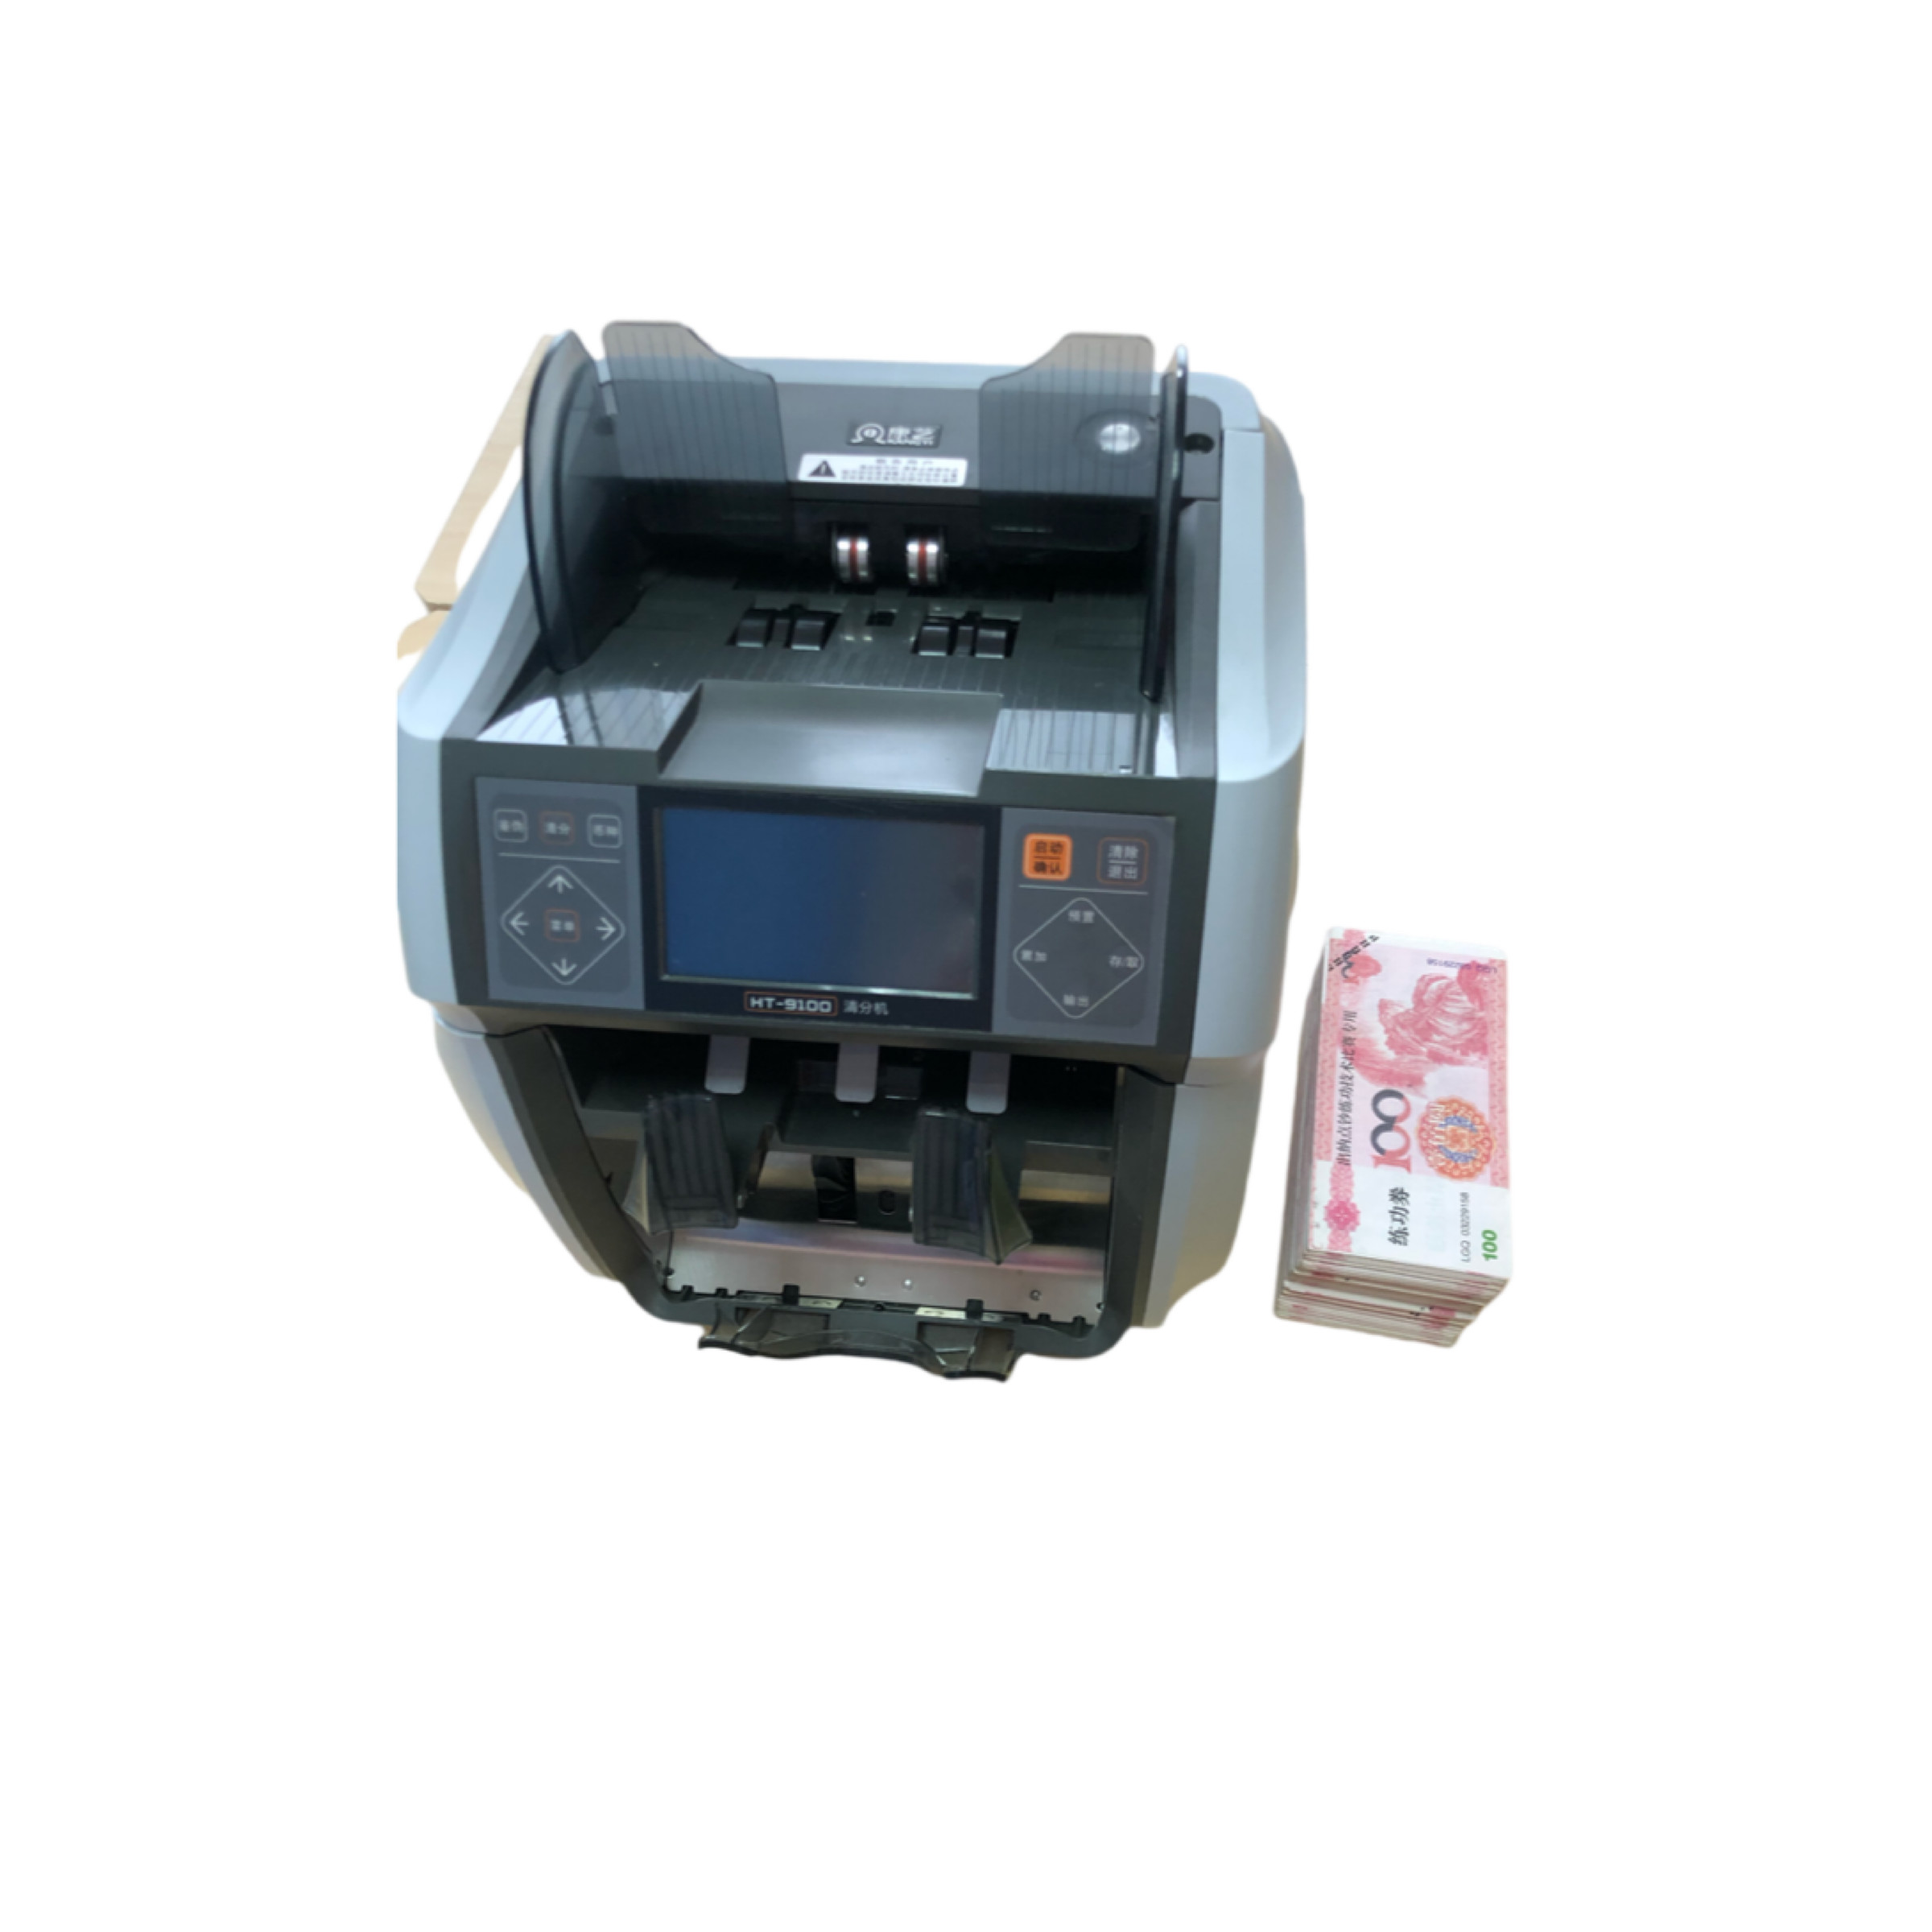 China Commercial 2 Pocket Money Sorter Machine For Sorting Banknotes on sale